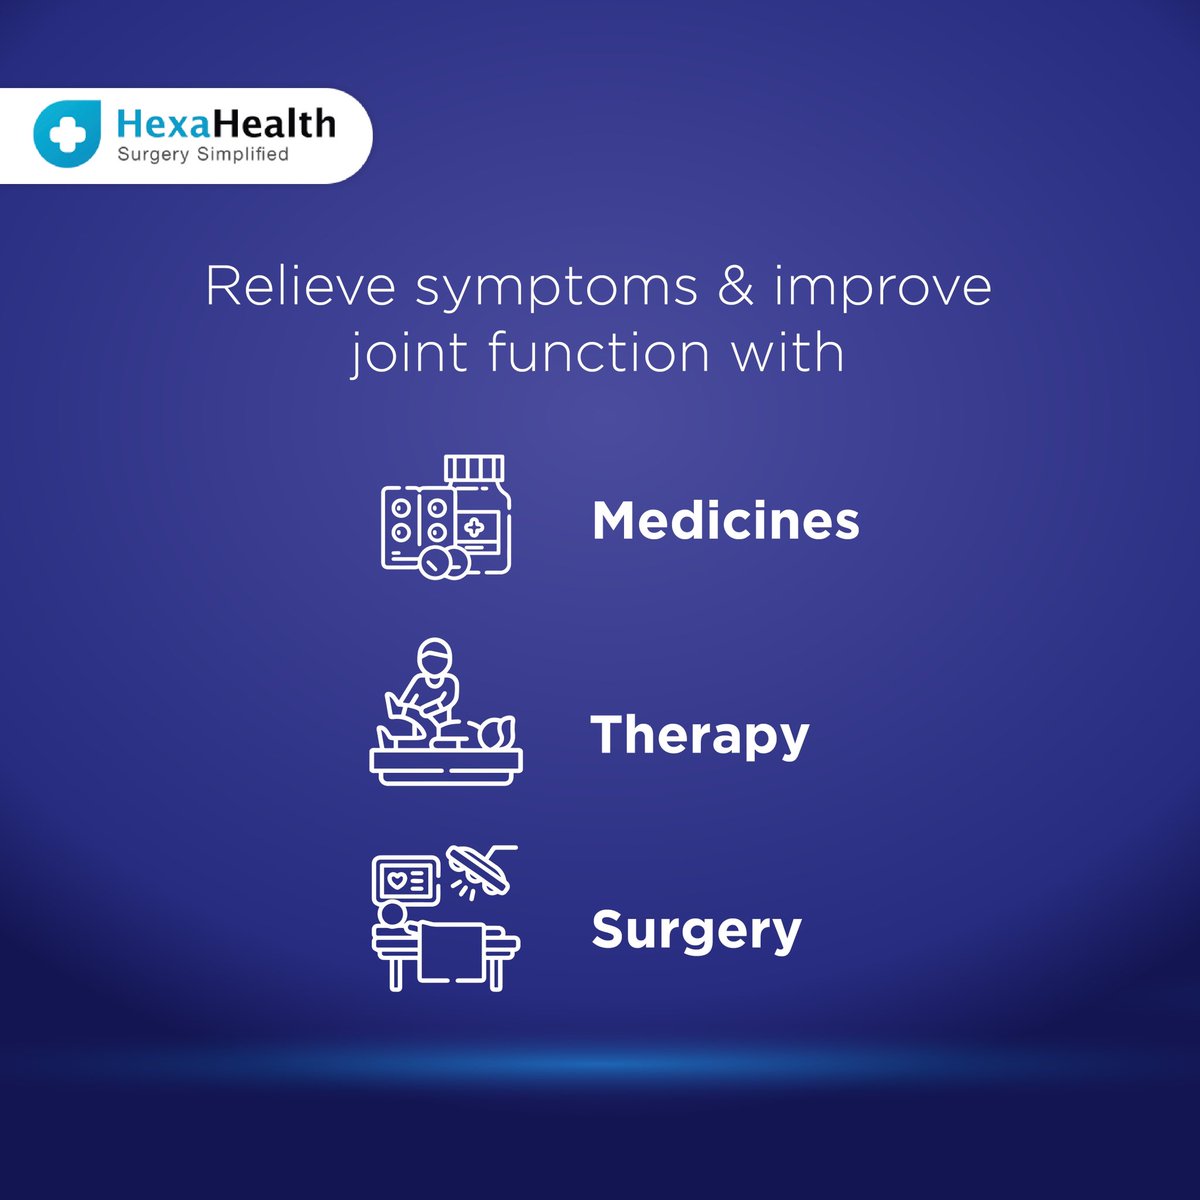 Arthritis treatment options to improve mobility and relieve pain. To consult, call 88606 88606
#HexaHealth #WeCARE #HealthyLife #FamilyHealth #surgery #surgeons #bestsurgeons #arthritis #jointpain #replacementsurgery #physicaltherapy